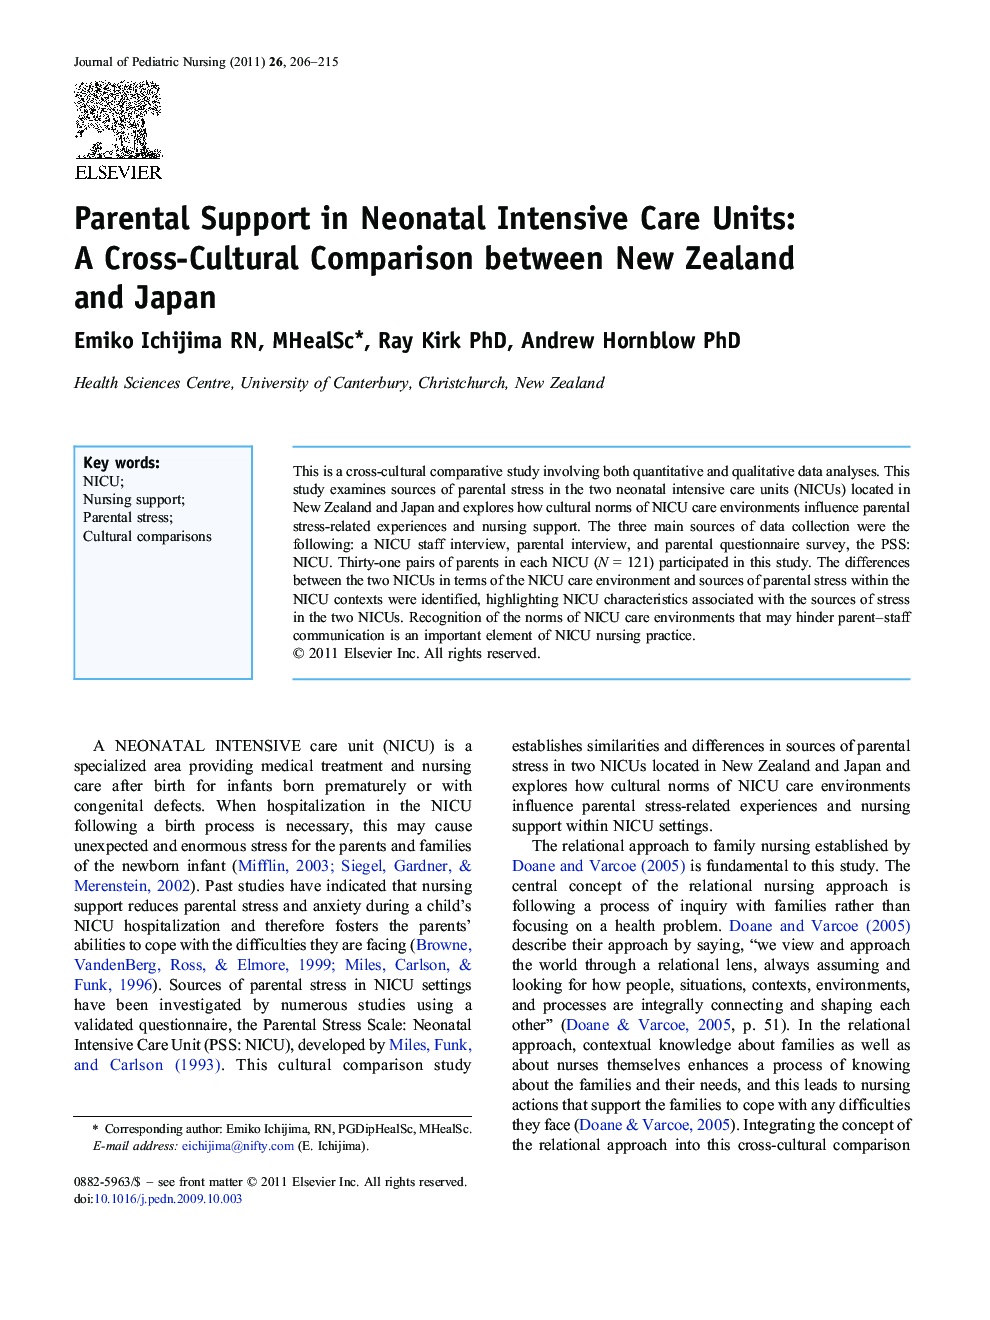 Parental Support in Neonatal Intensive Care Units: A Cross-Cultural Comparison between New Zealand and Japan